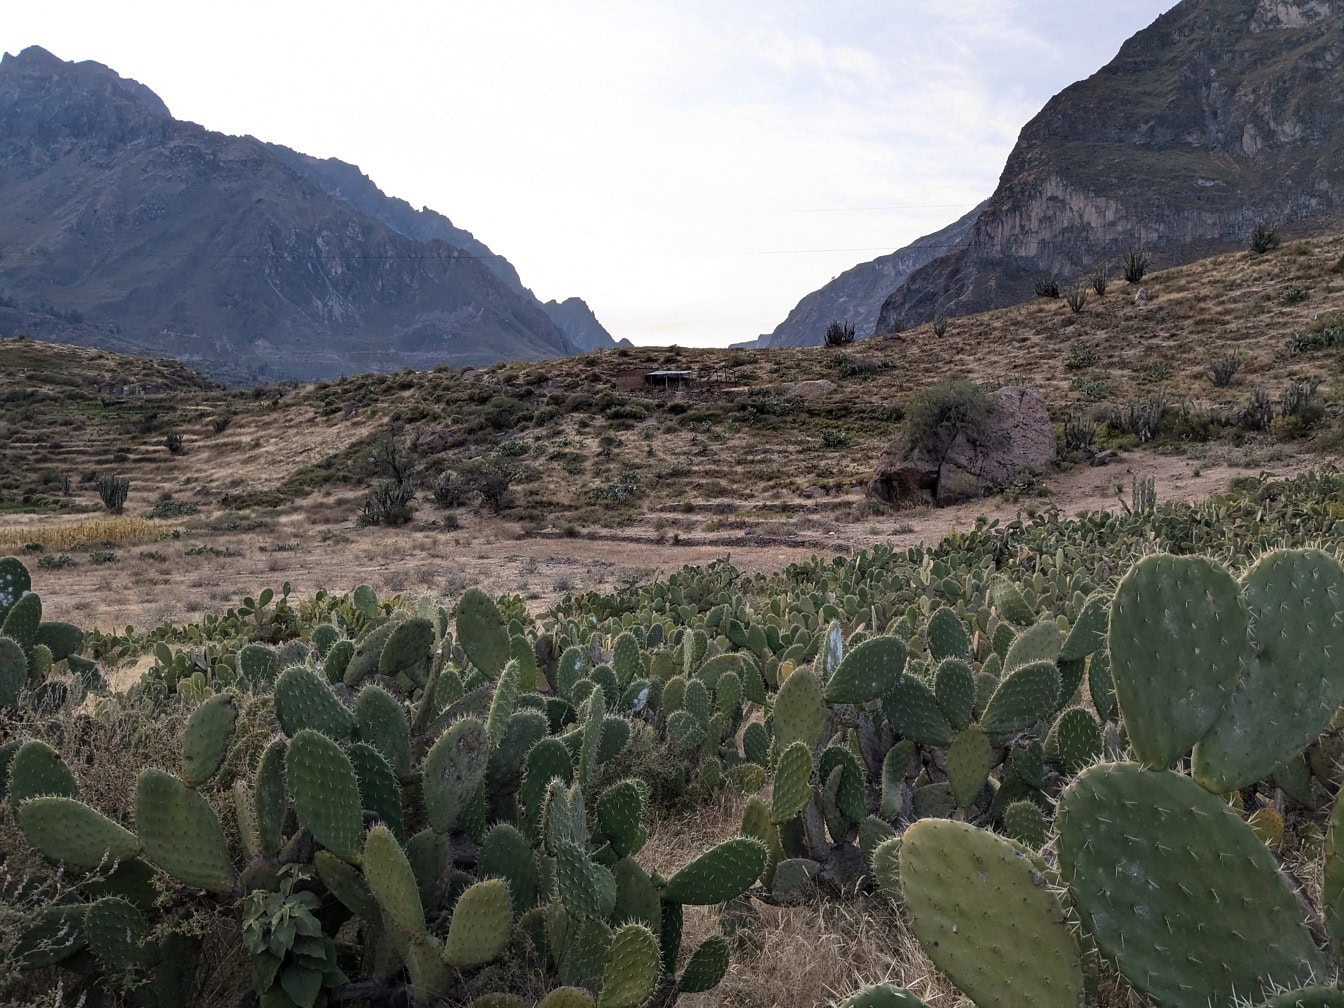 Landscape of Peruvian nature with cactuses in foreground and with mountains in background